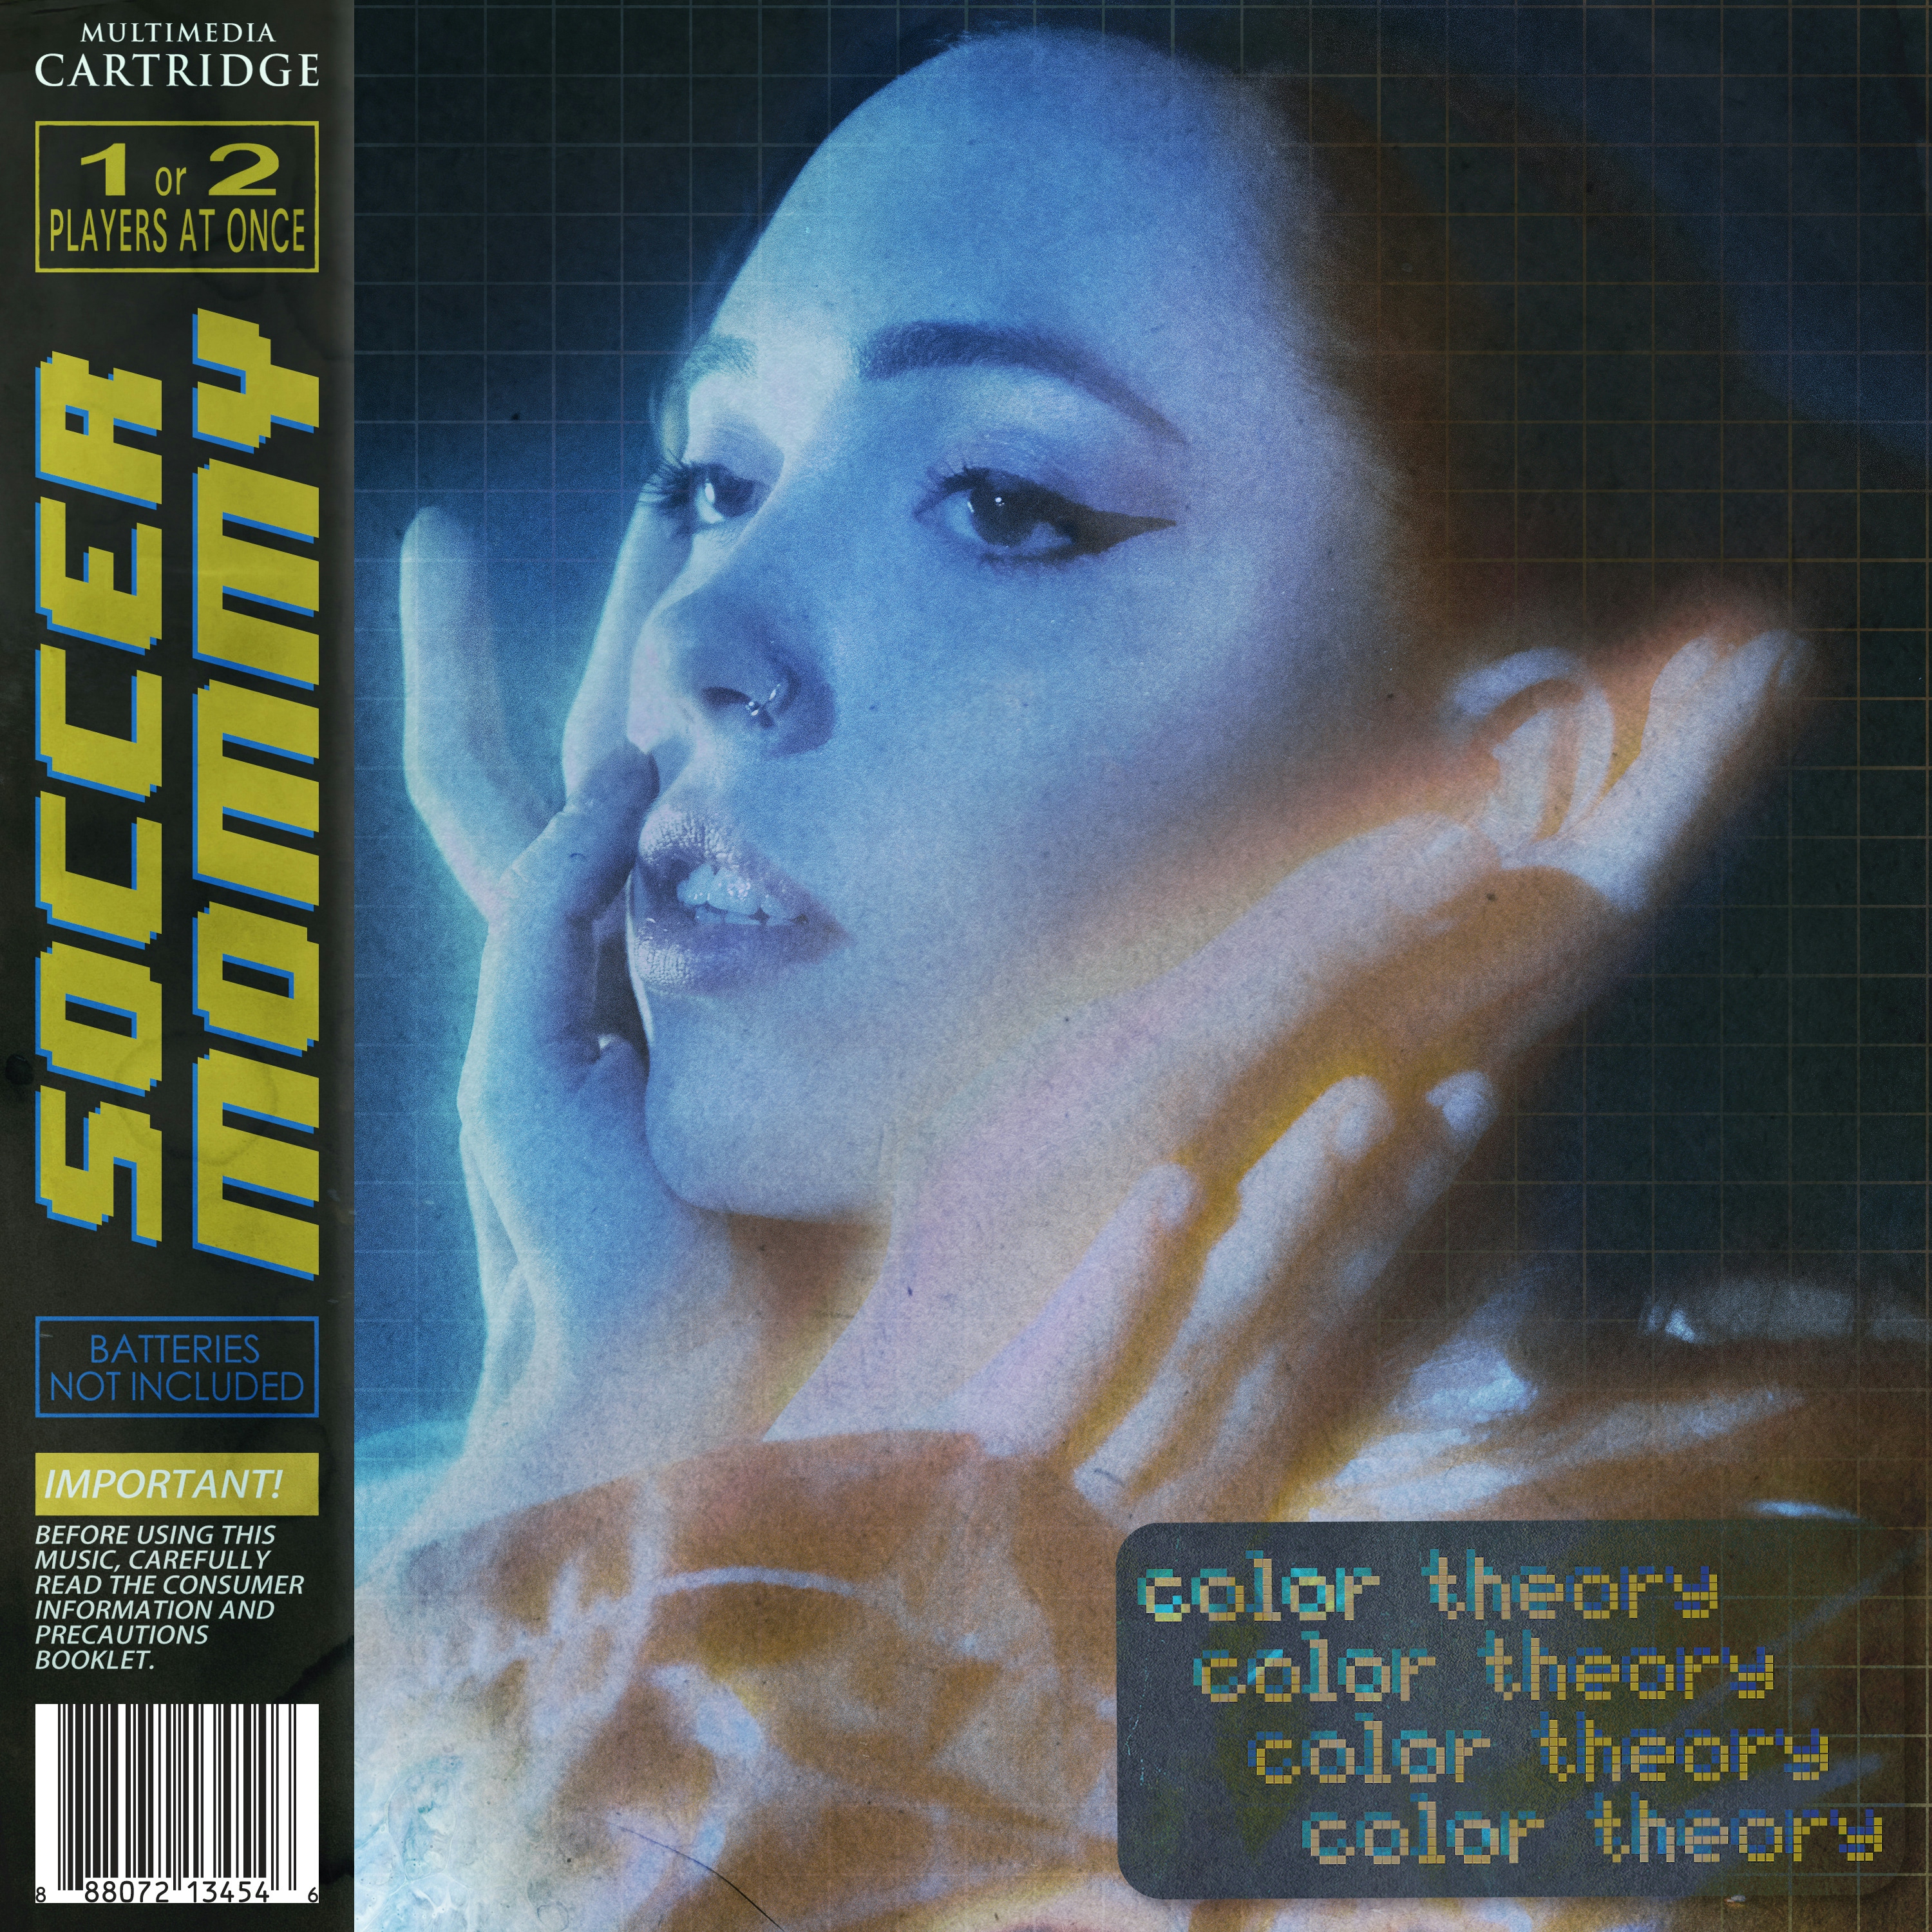 Album artwork for color theory by Soccer Mommy